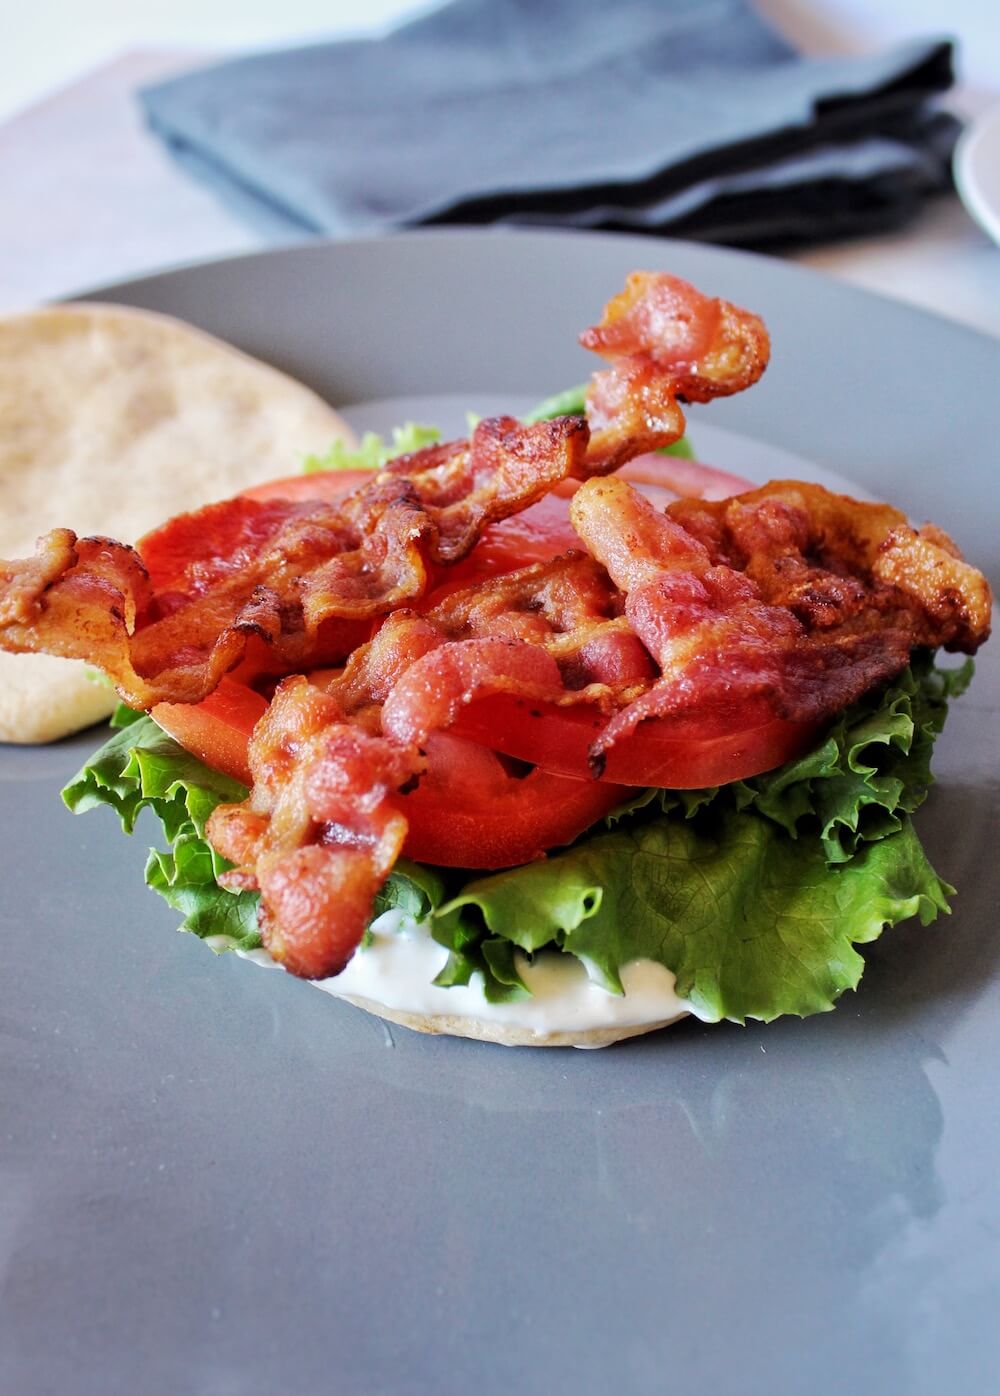 Perfectly cooked bacon atop Keto cloud bread makes this delicious BLT sandwich.